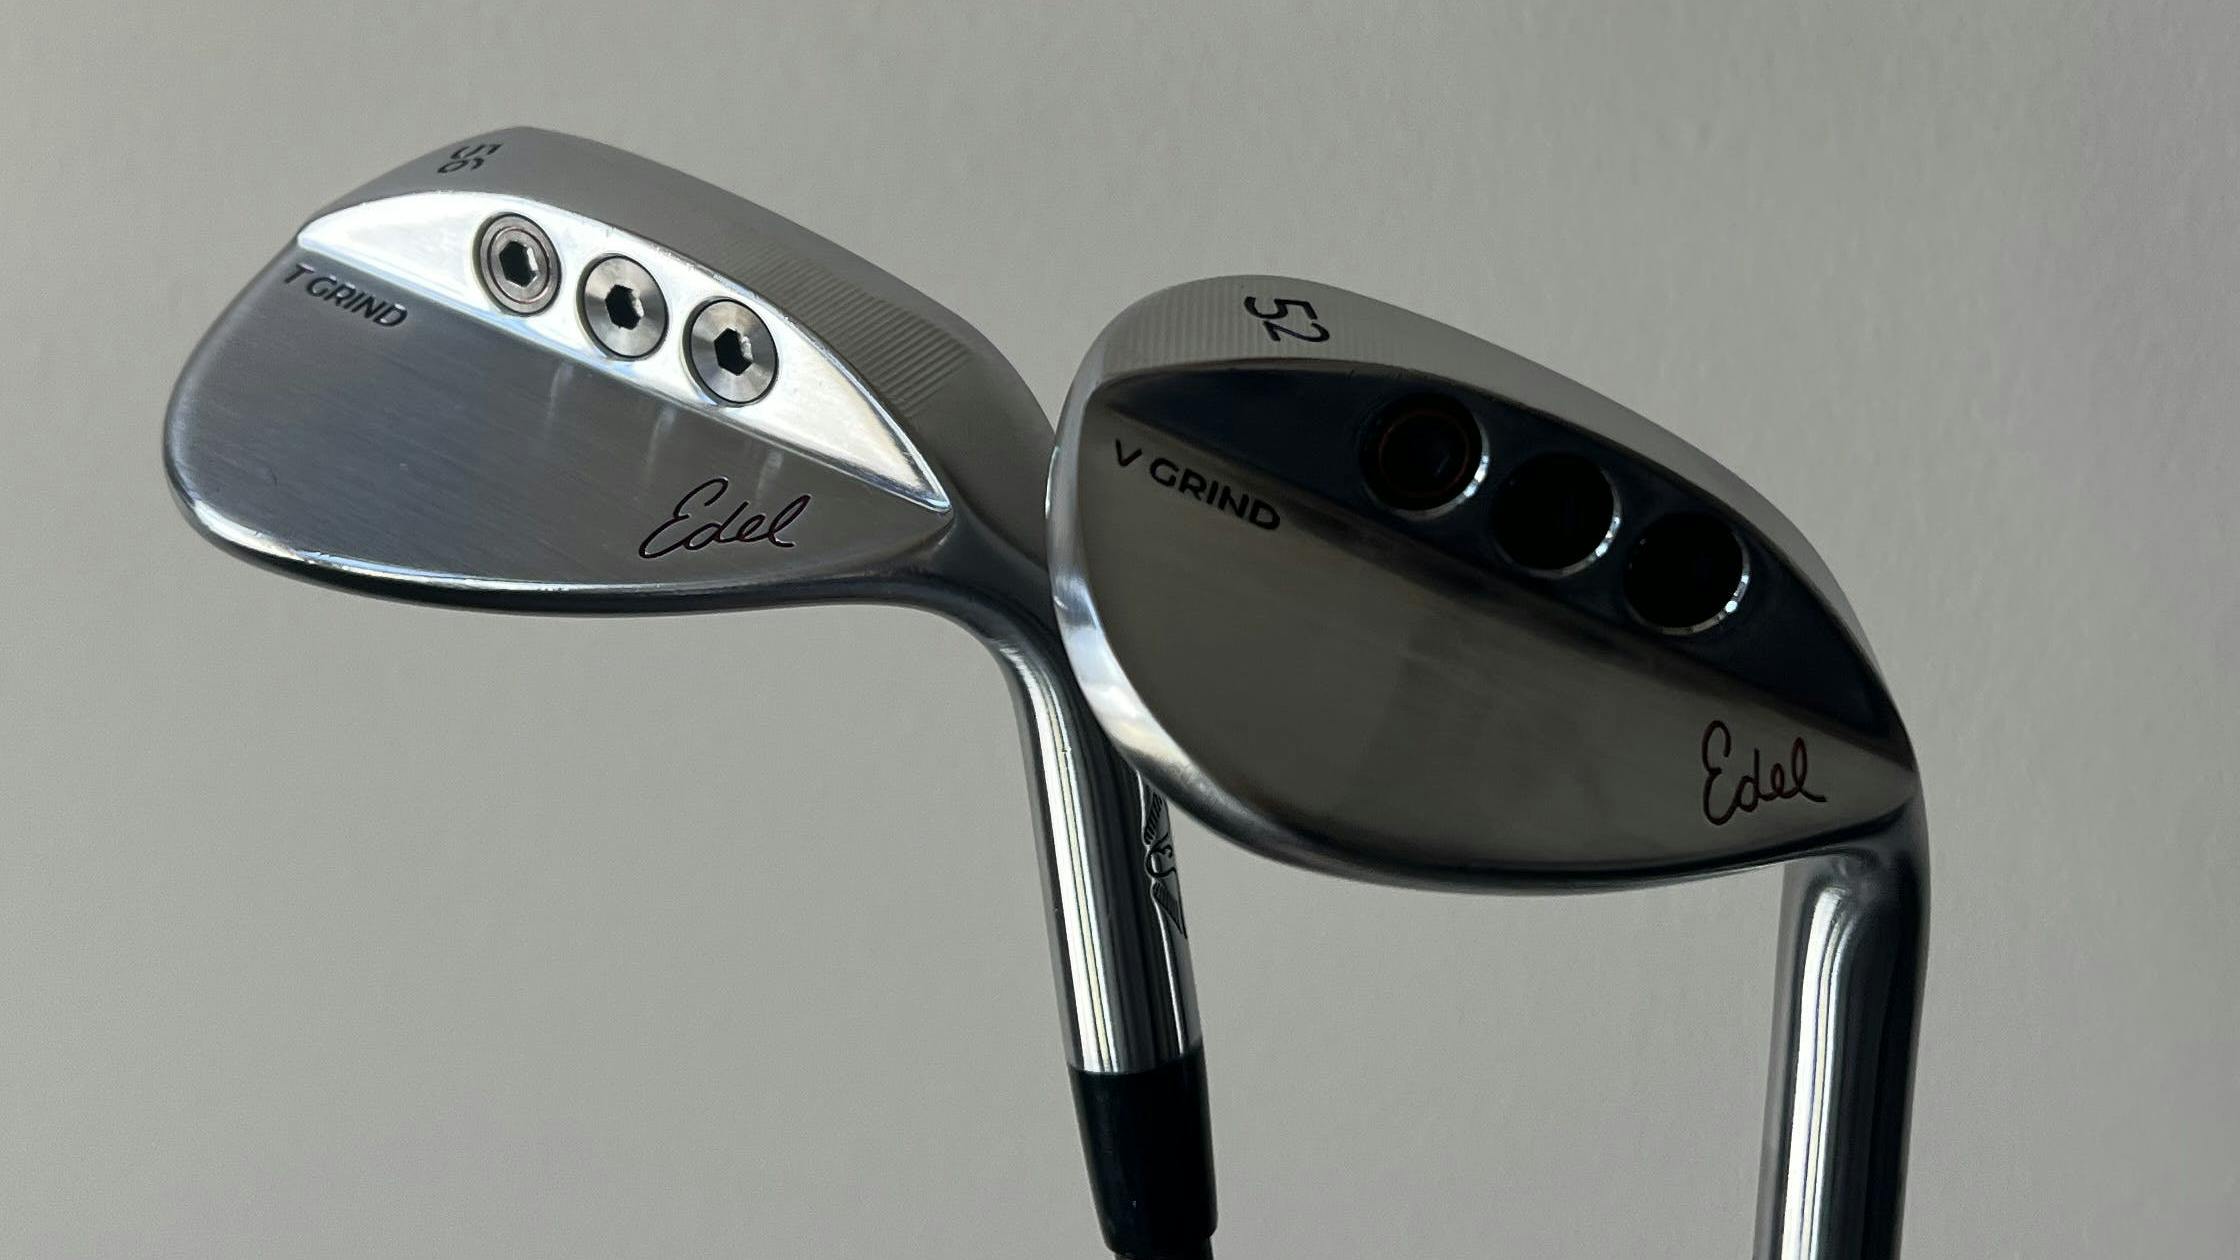 The Edel Golf SMS Wedge. 